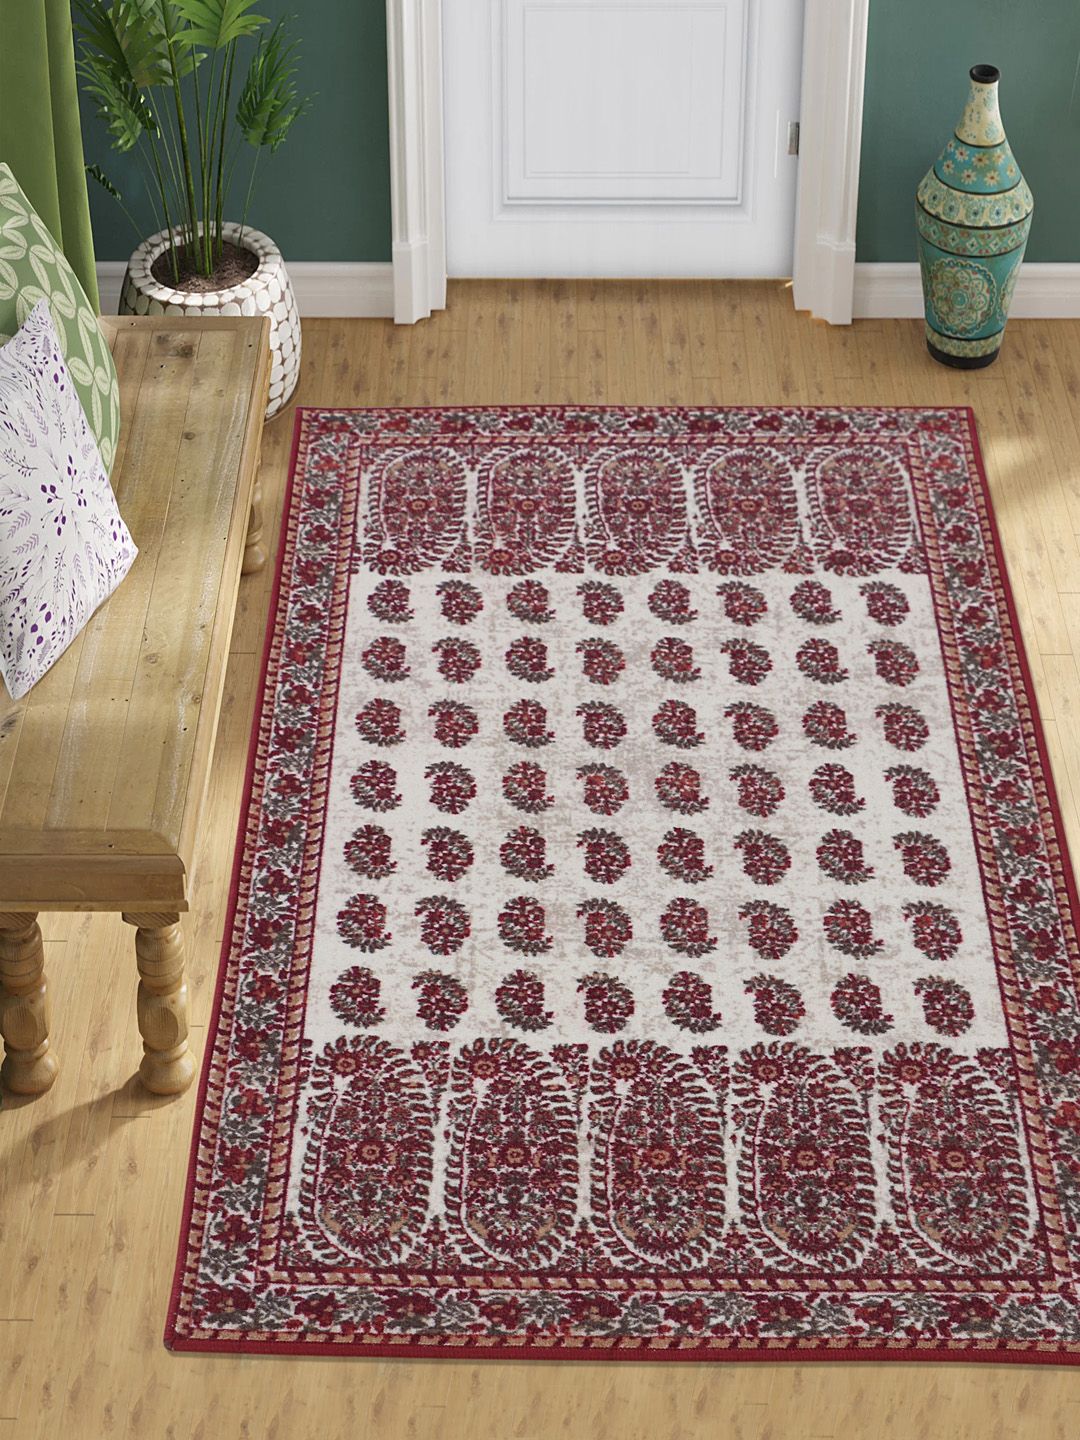 RUGSMITH OffWhite & Maroon Patterned Anti-Skid Carpet Price in India